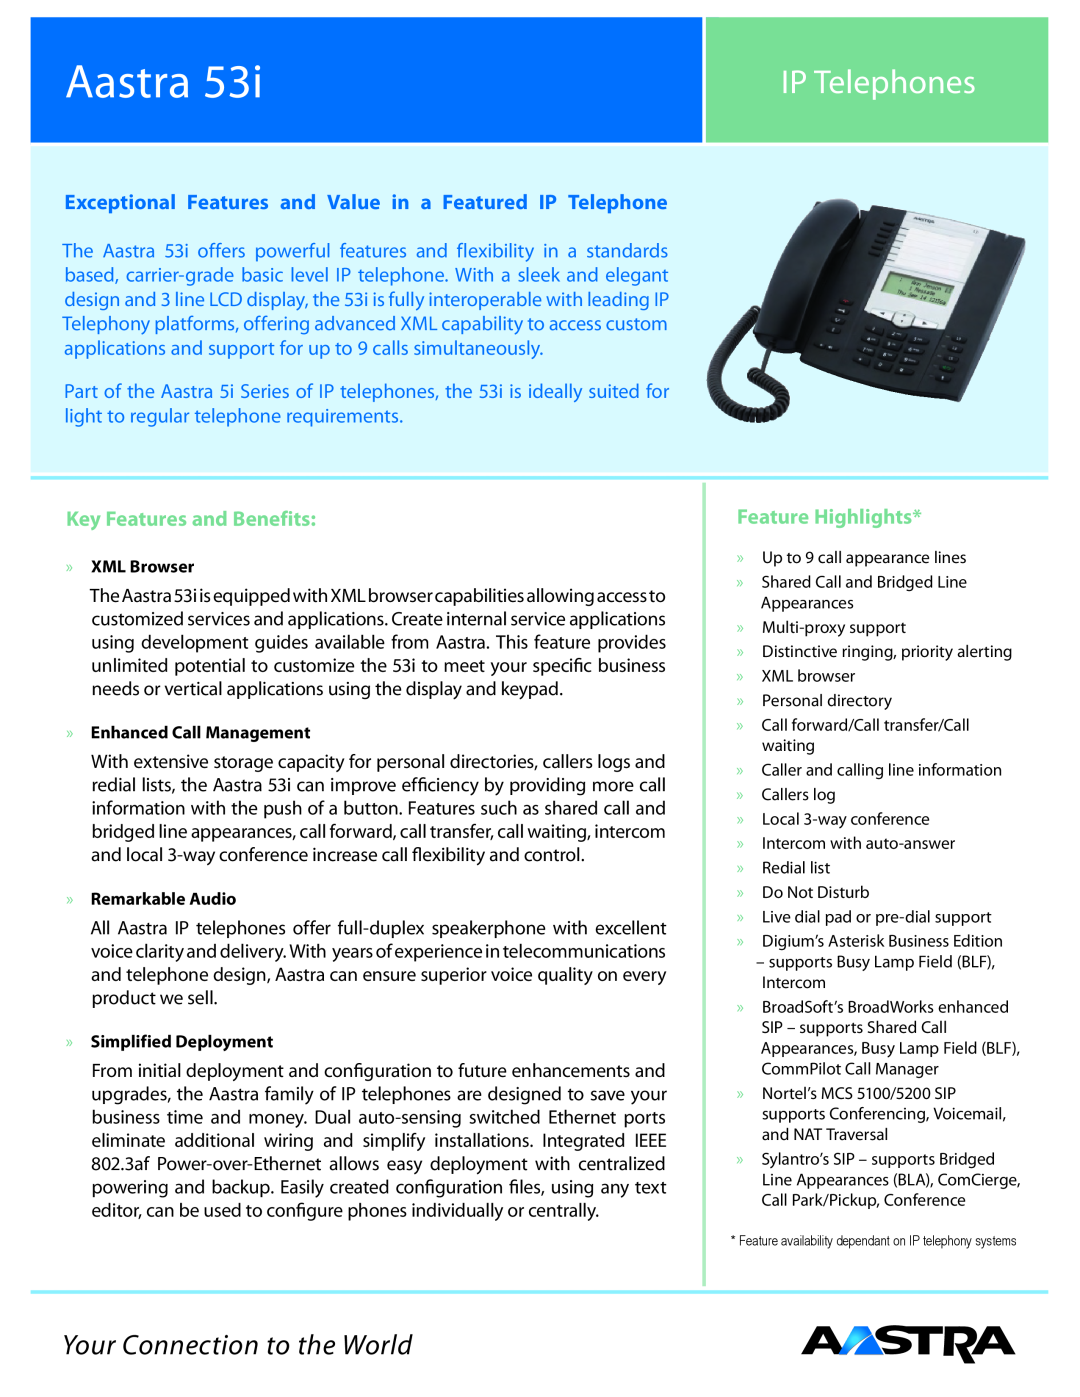 Aastra Telecom 53I manual Aastra, IP Telephones, Your Connection to the World, Key Features and Benefits 